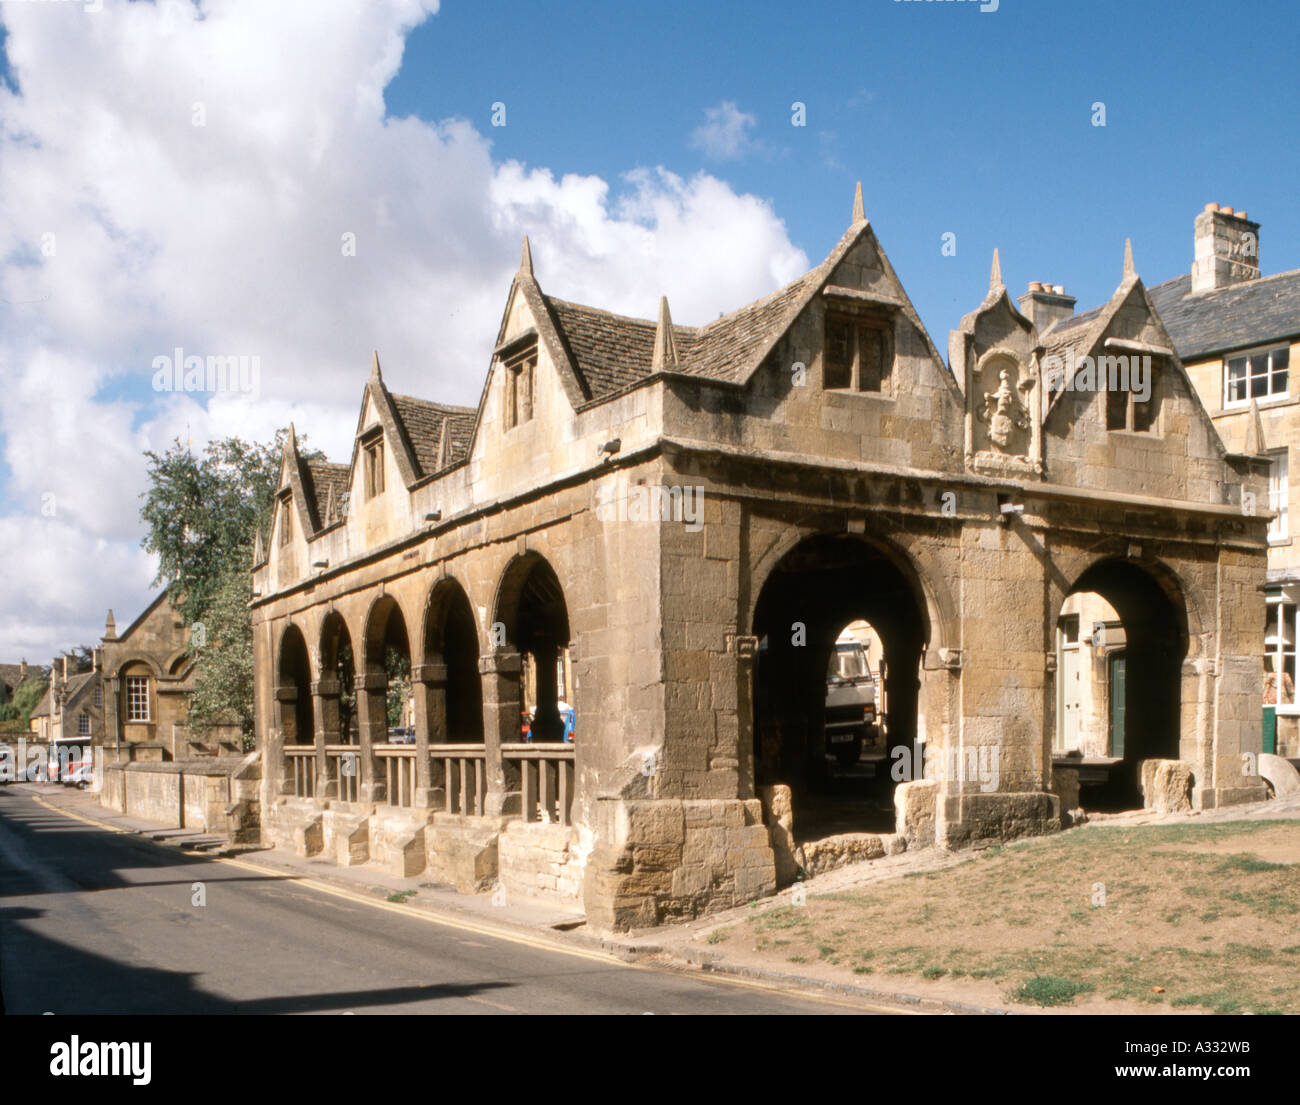 The Butter Market (built by Sir Baptist Hicks in 1627) in the ancient Cotswold town of Chipping Campden, Gloucestershire Stock Photo